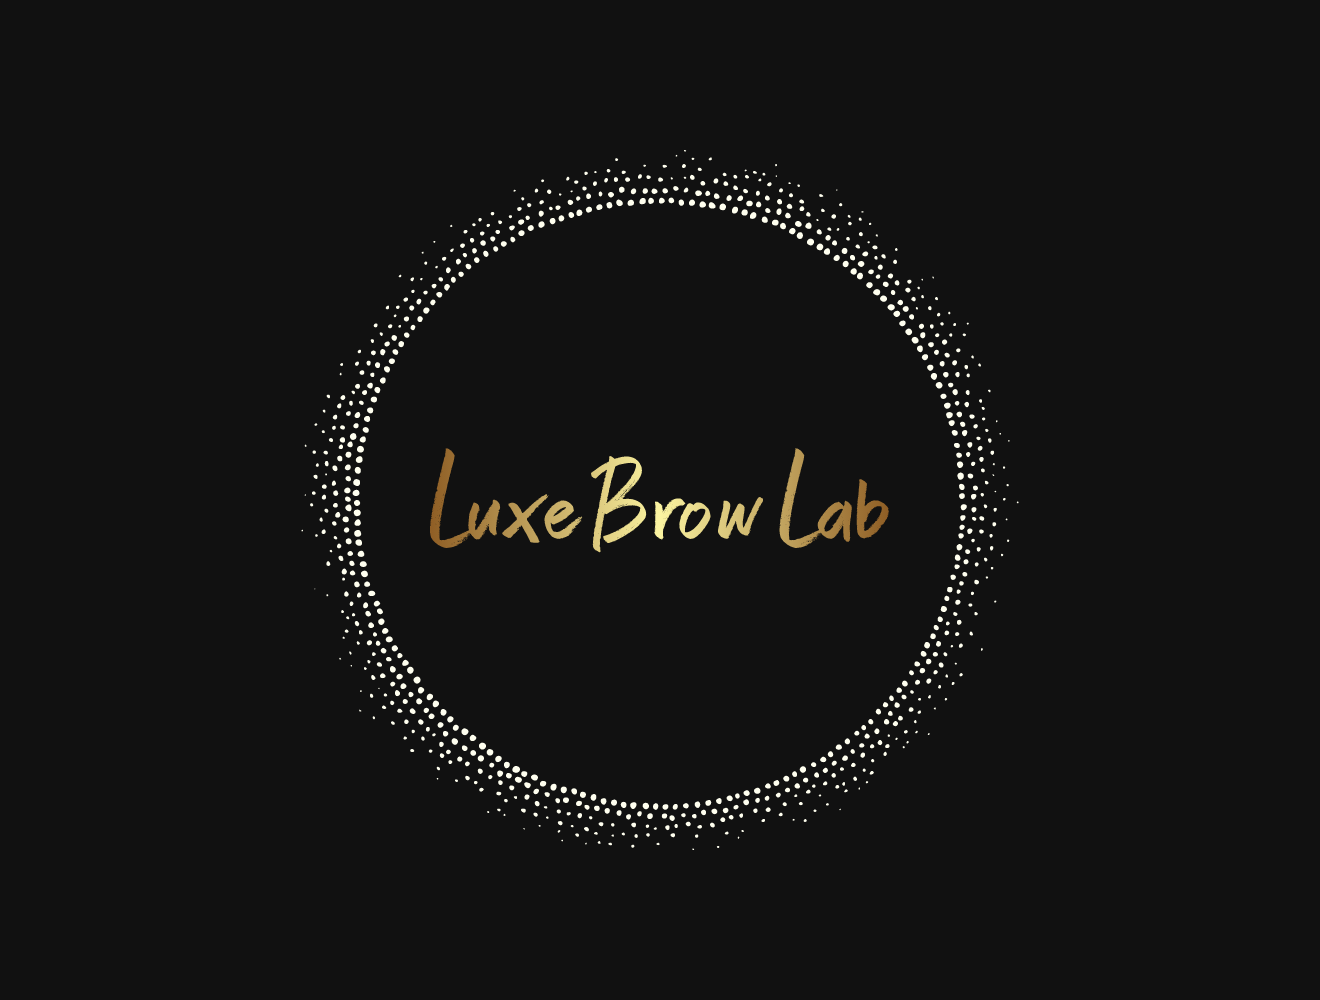 Introducing Luxe Brow Lab: The Premier Destination for Eyebrow Artistry Opens in Lithopolis, OH